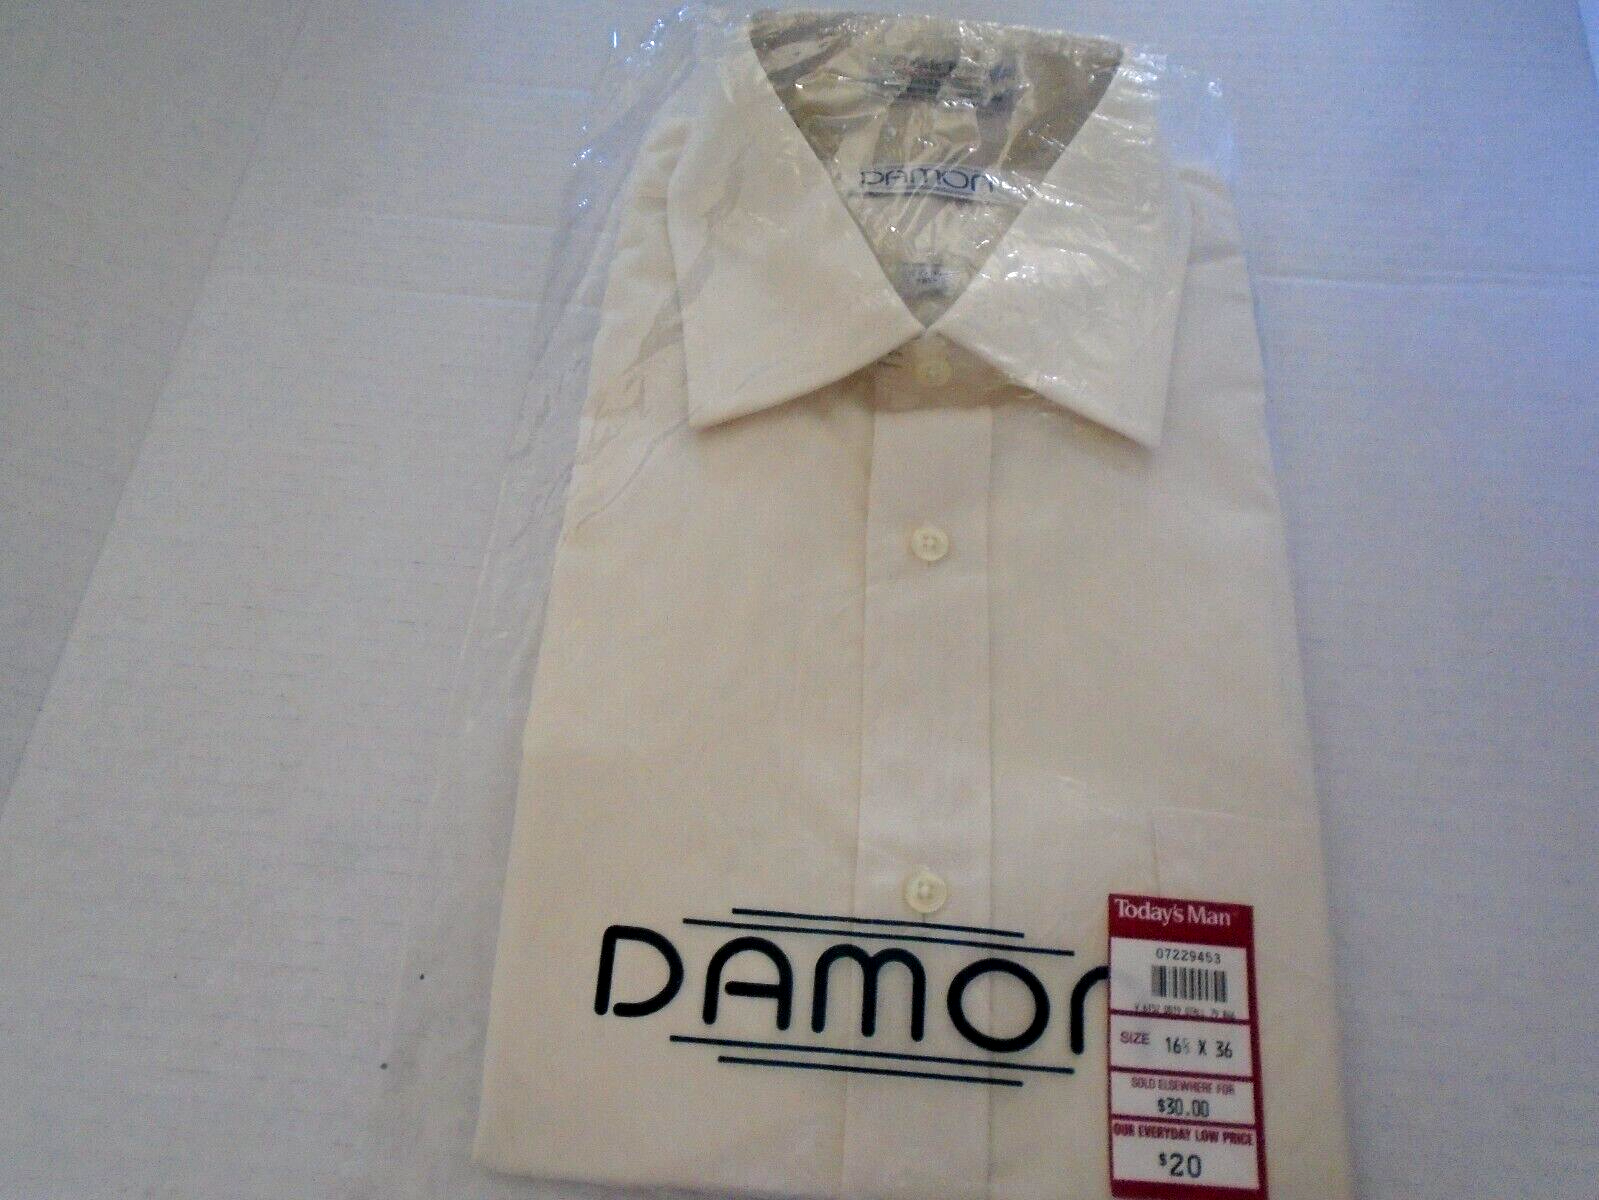 Primary image for Damon Classic Poplin 16 1/2-36 Tall White Long Sleeves Dress Shirt New w/Tags